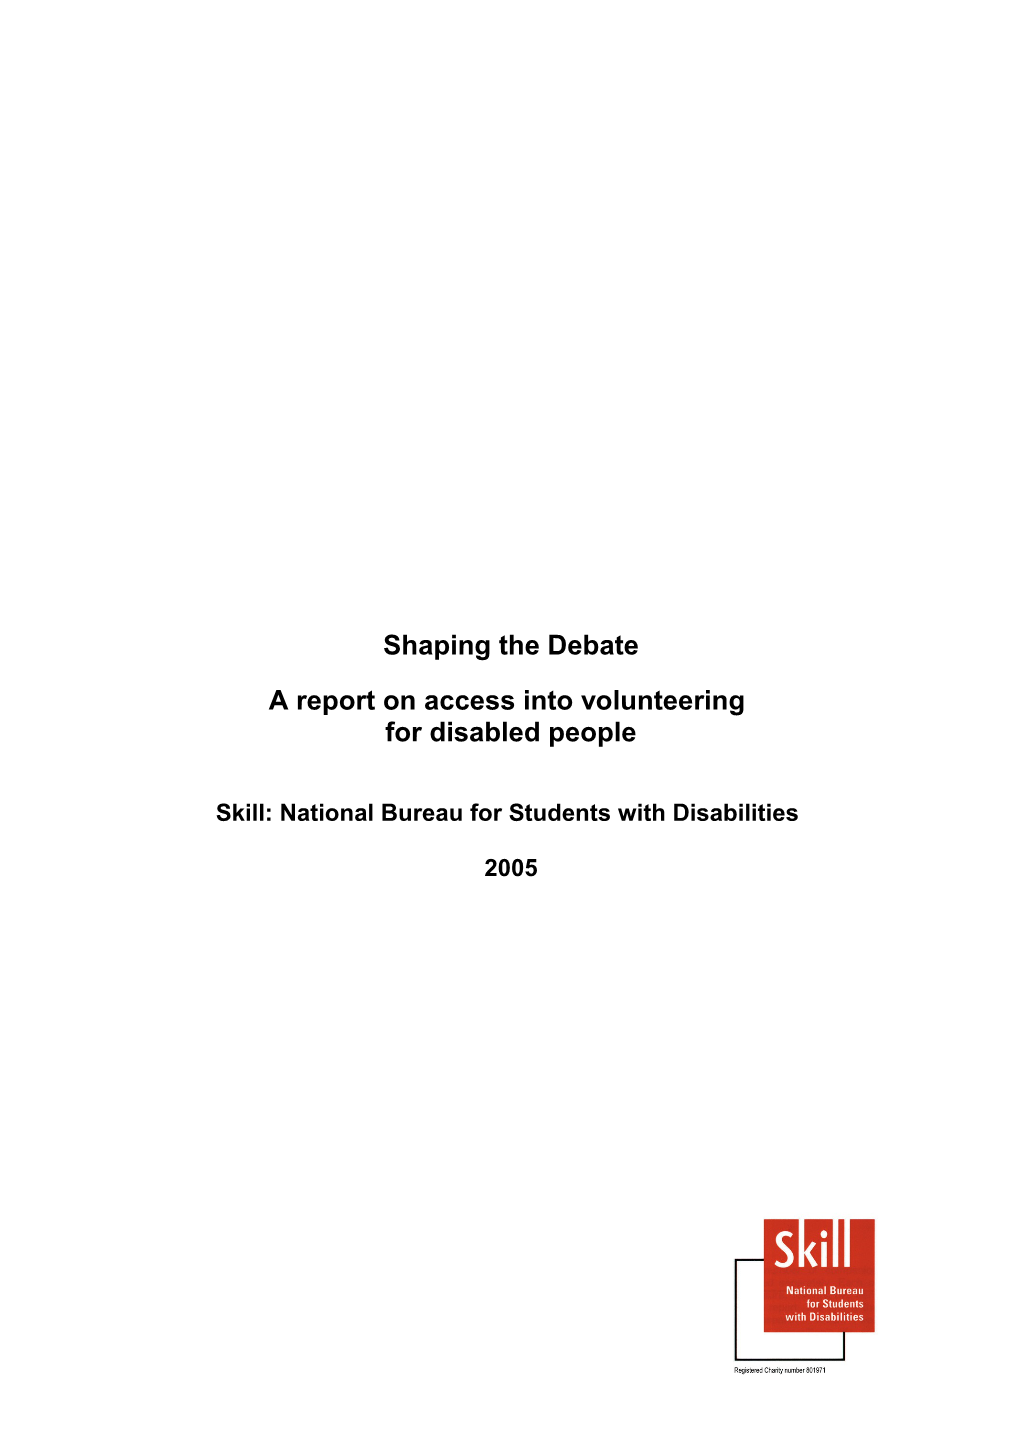 A Report on Access Into Volunteering